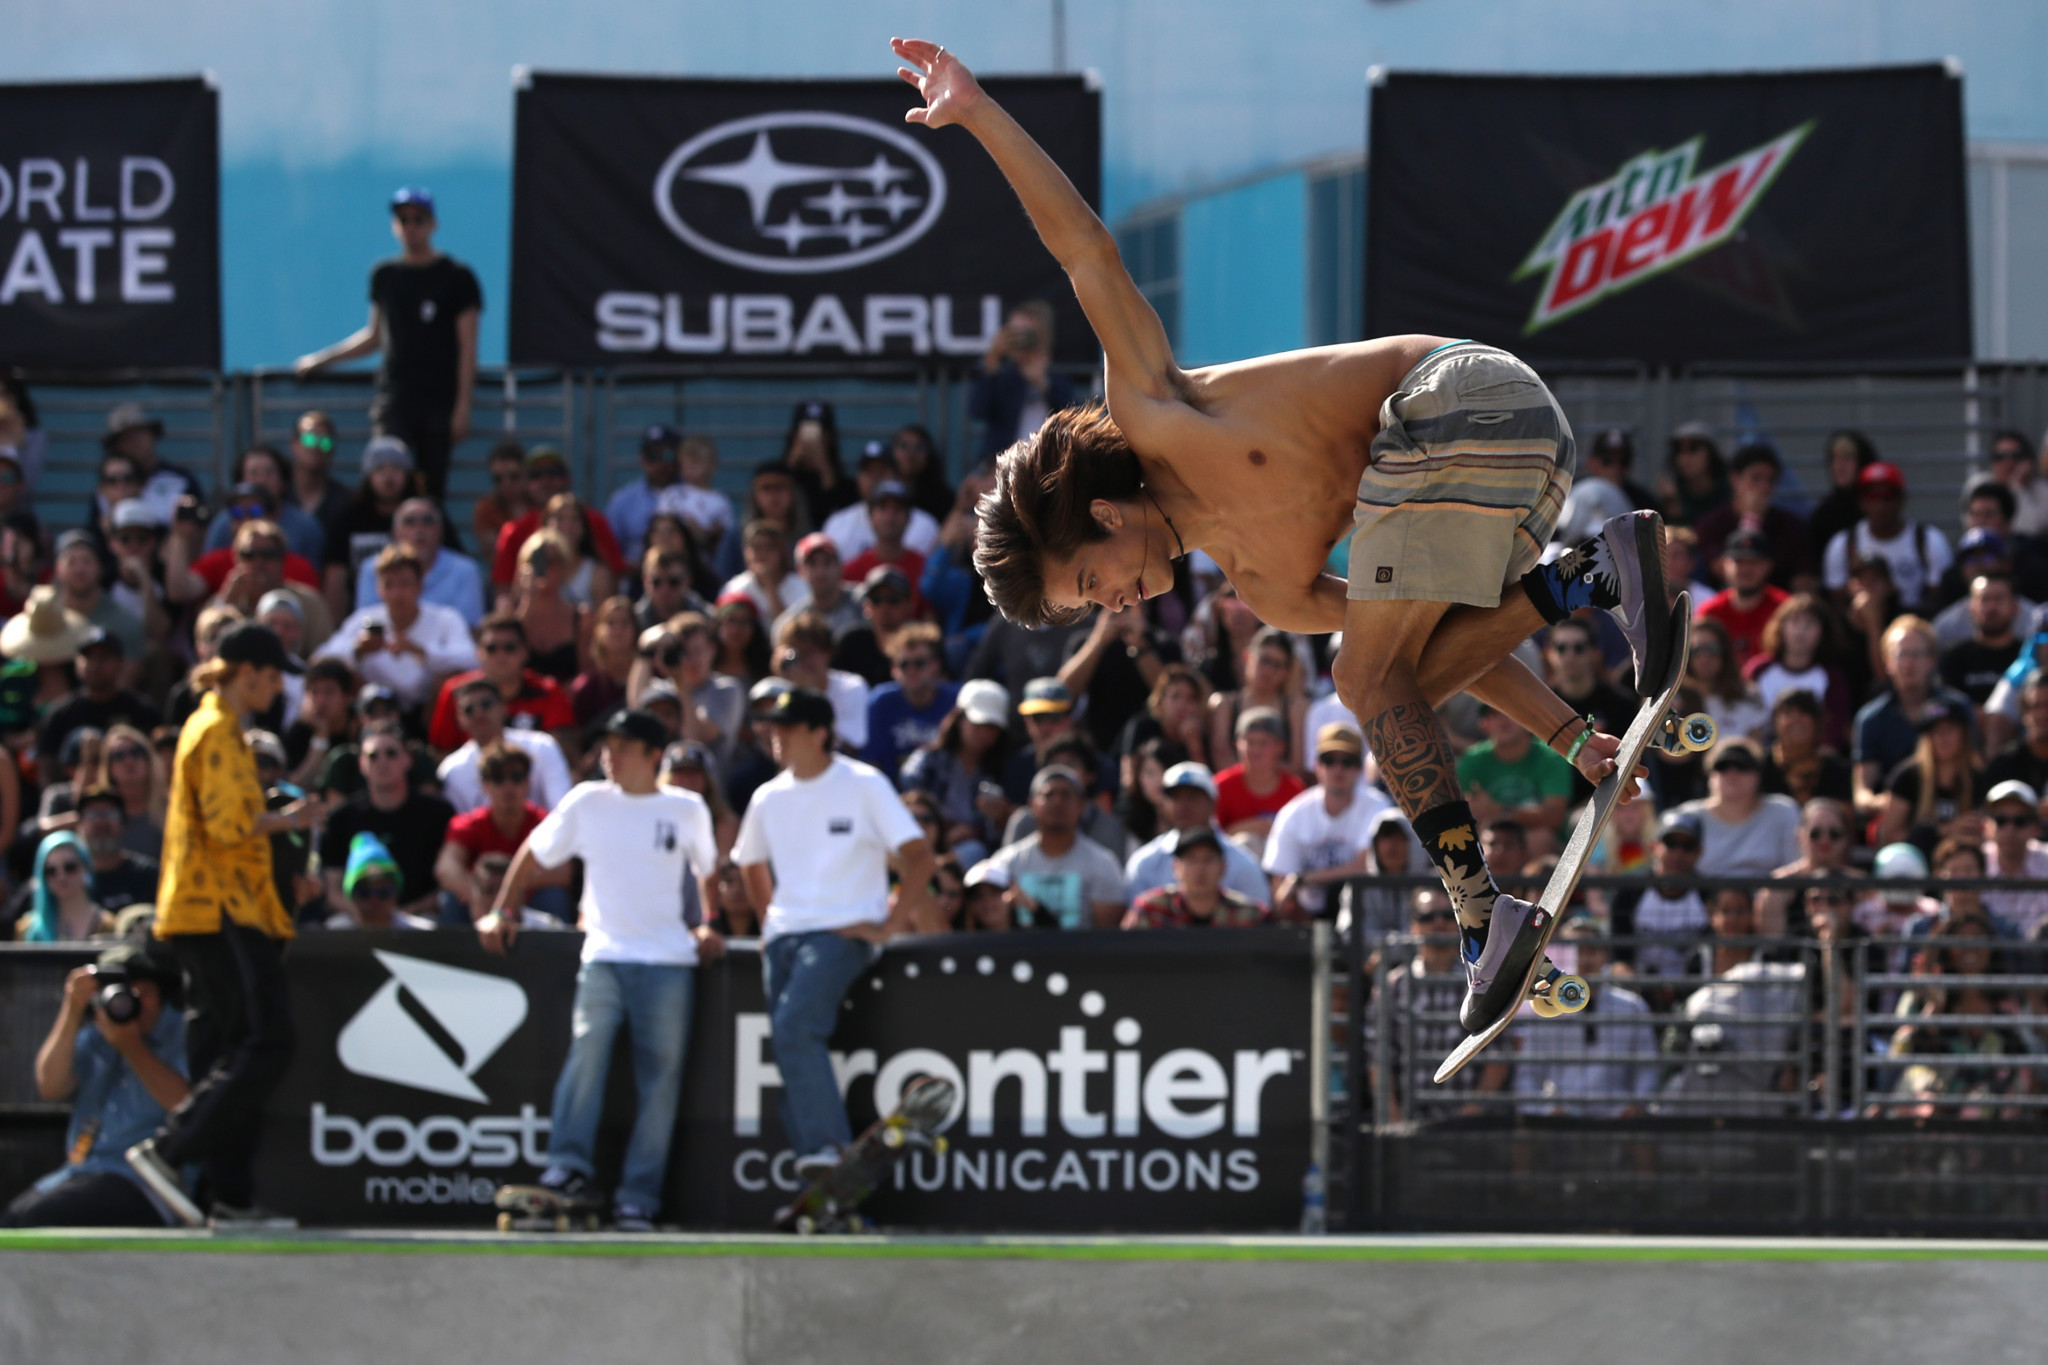 The Long Beach event is an Olympic qualifier for skateboarding's debut at Tokyo 2020 ©Getty Images